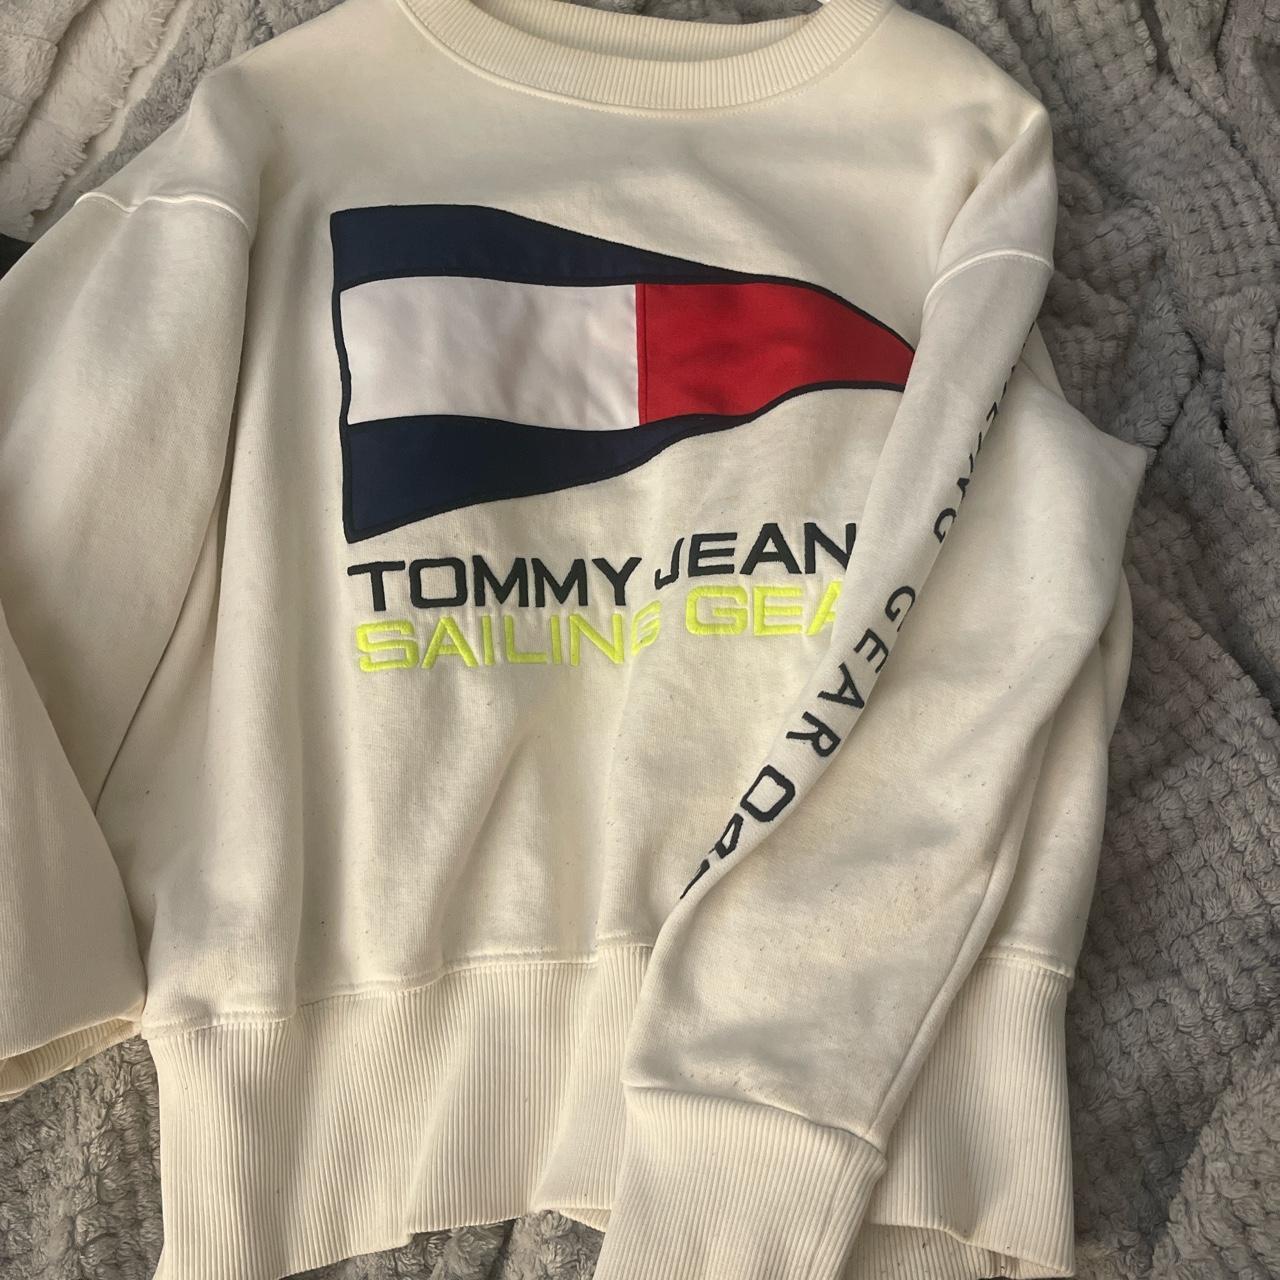 Vintage Tommy Jeans Sailing Gear Fully Embroidered Crewneck Sweatshirt Size  XXS